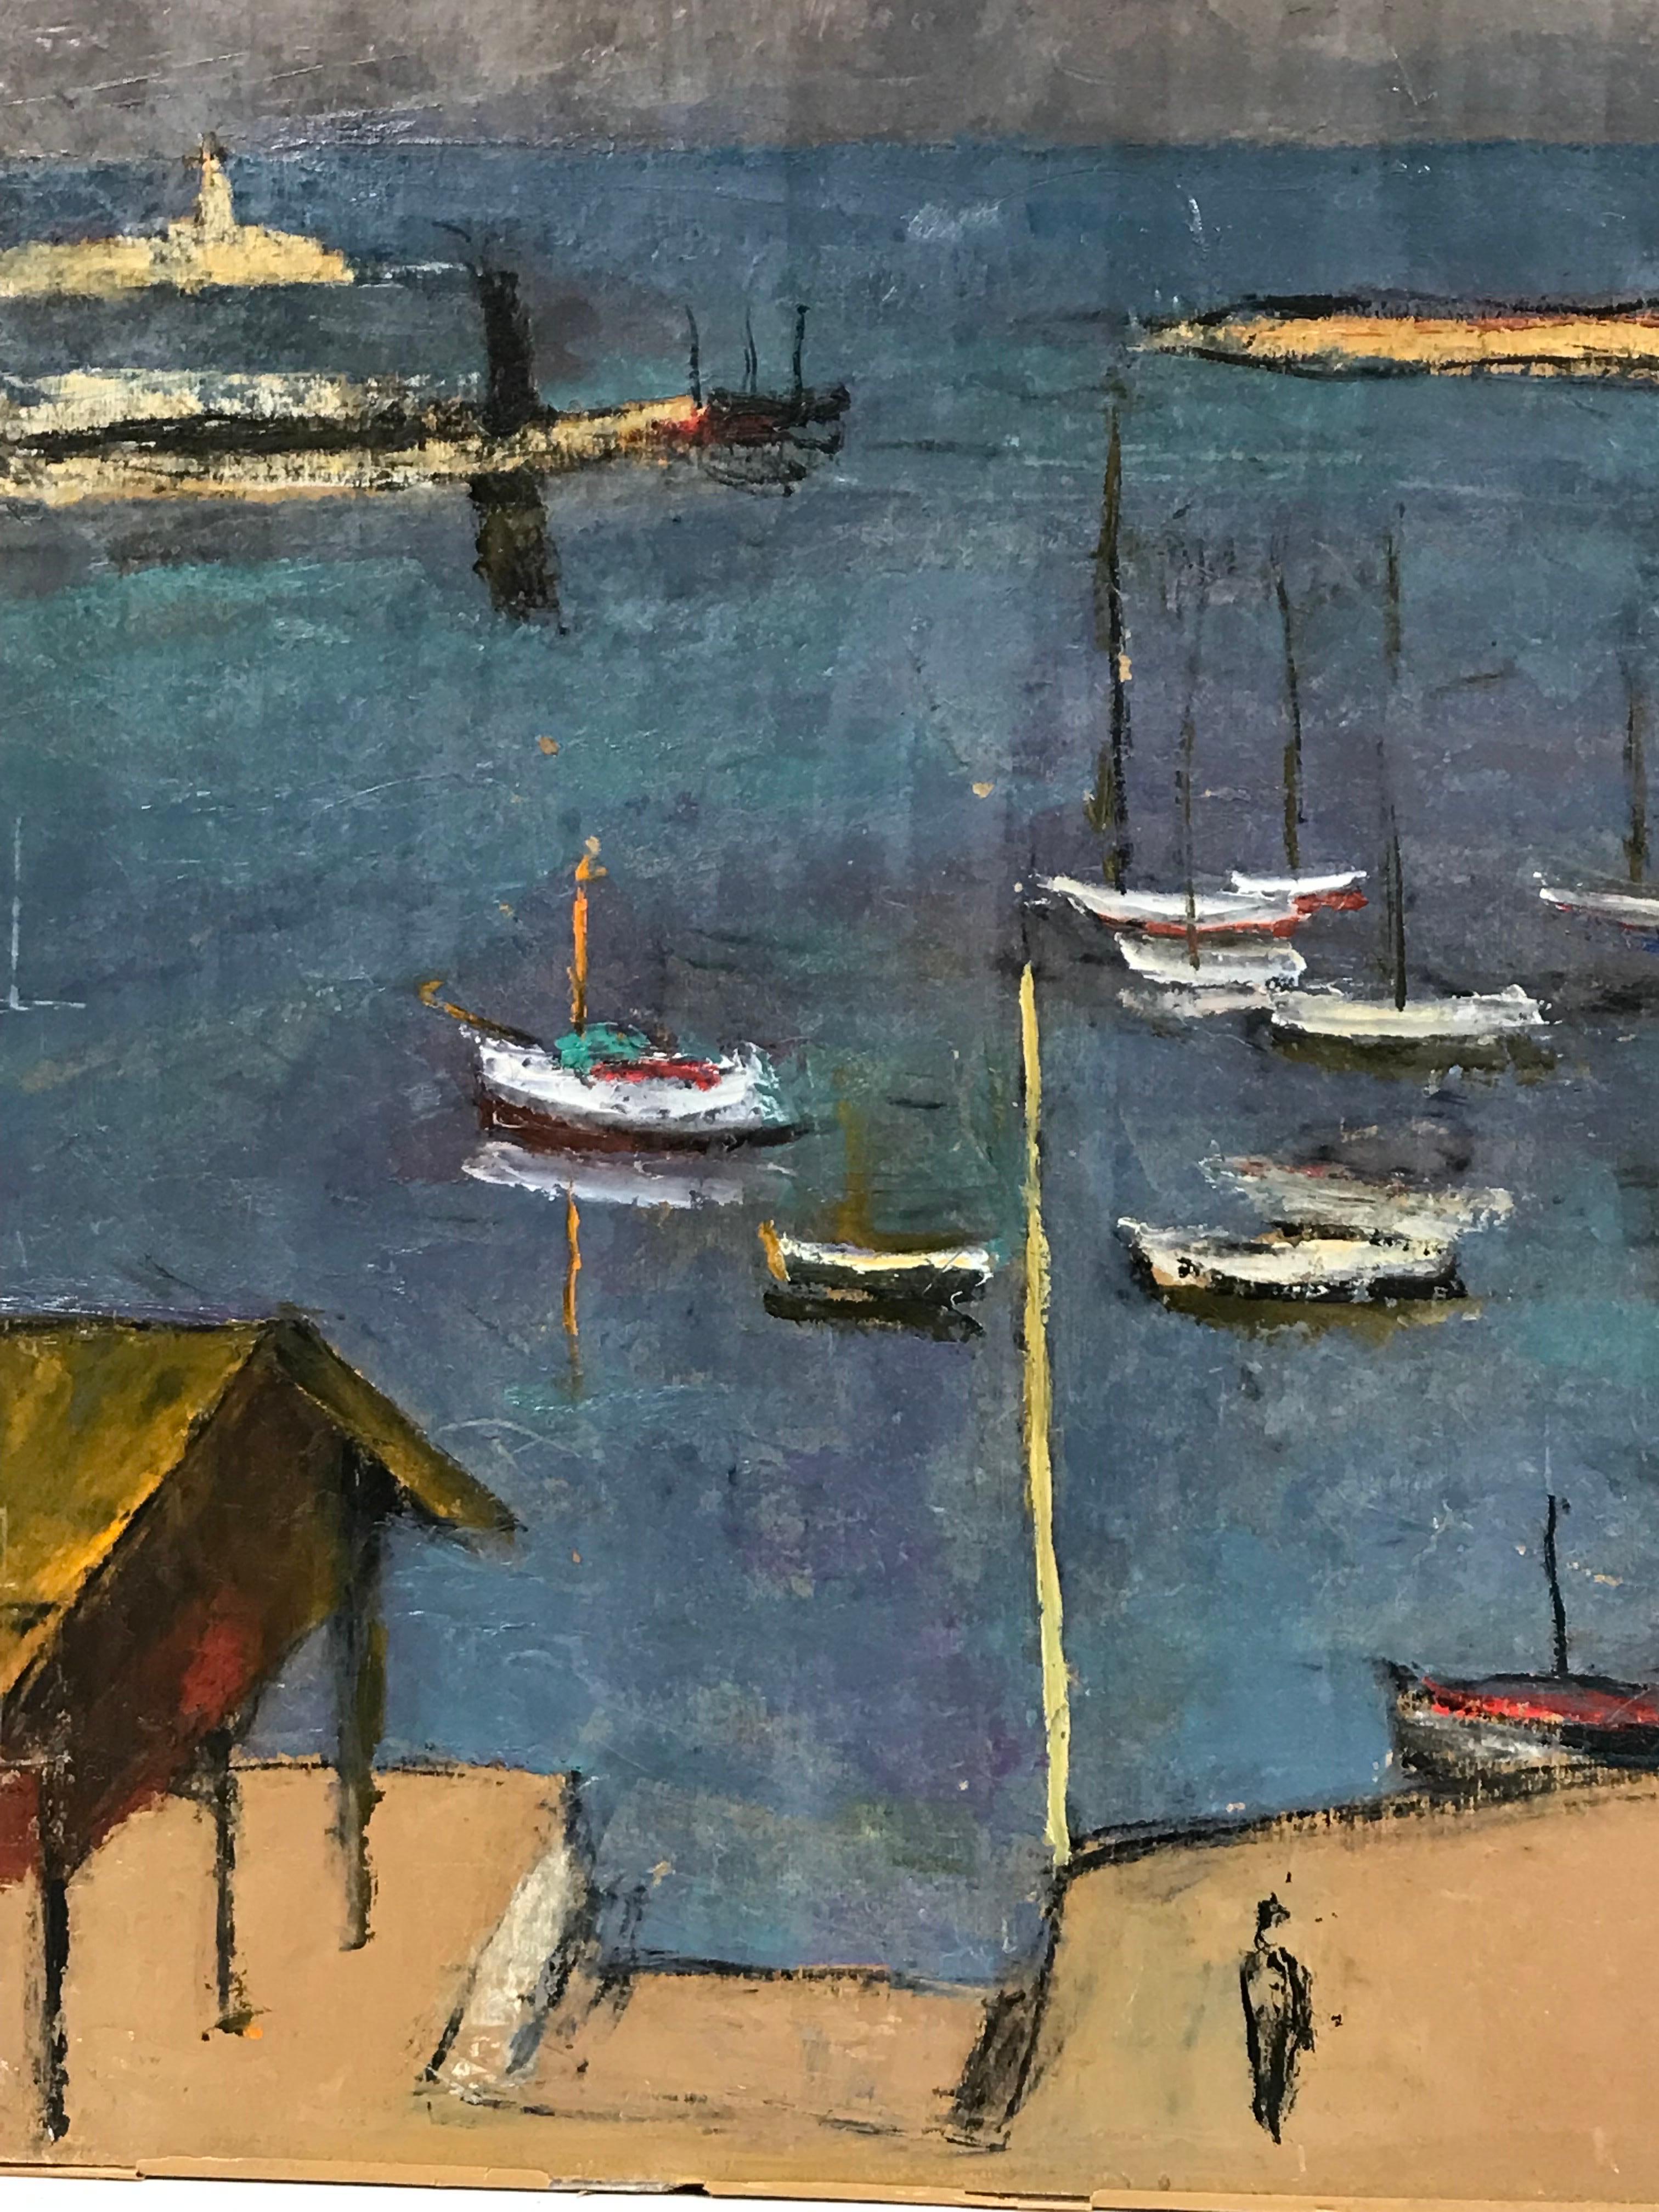 Artist/ School: Rene Bellanger (French 1895-1964), signed

Title: Castellon de la Plana, boats in the port. The work was exhibited with the French Salon des Independants in 1965. 

Medium: oil painting on wood board, unframed

painting: 23.75 x 29